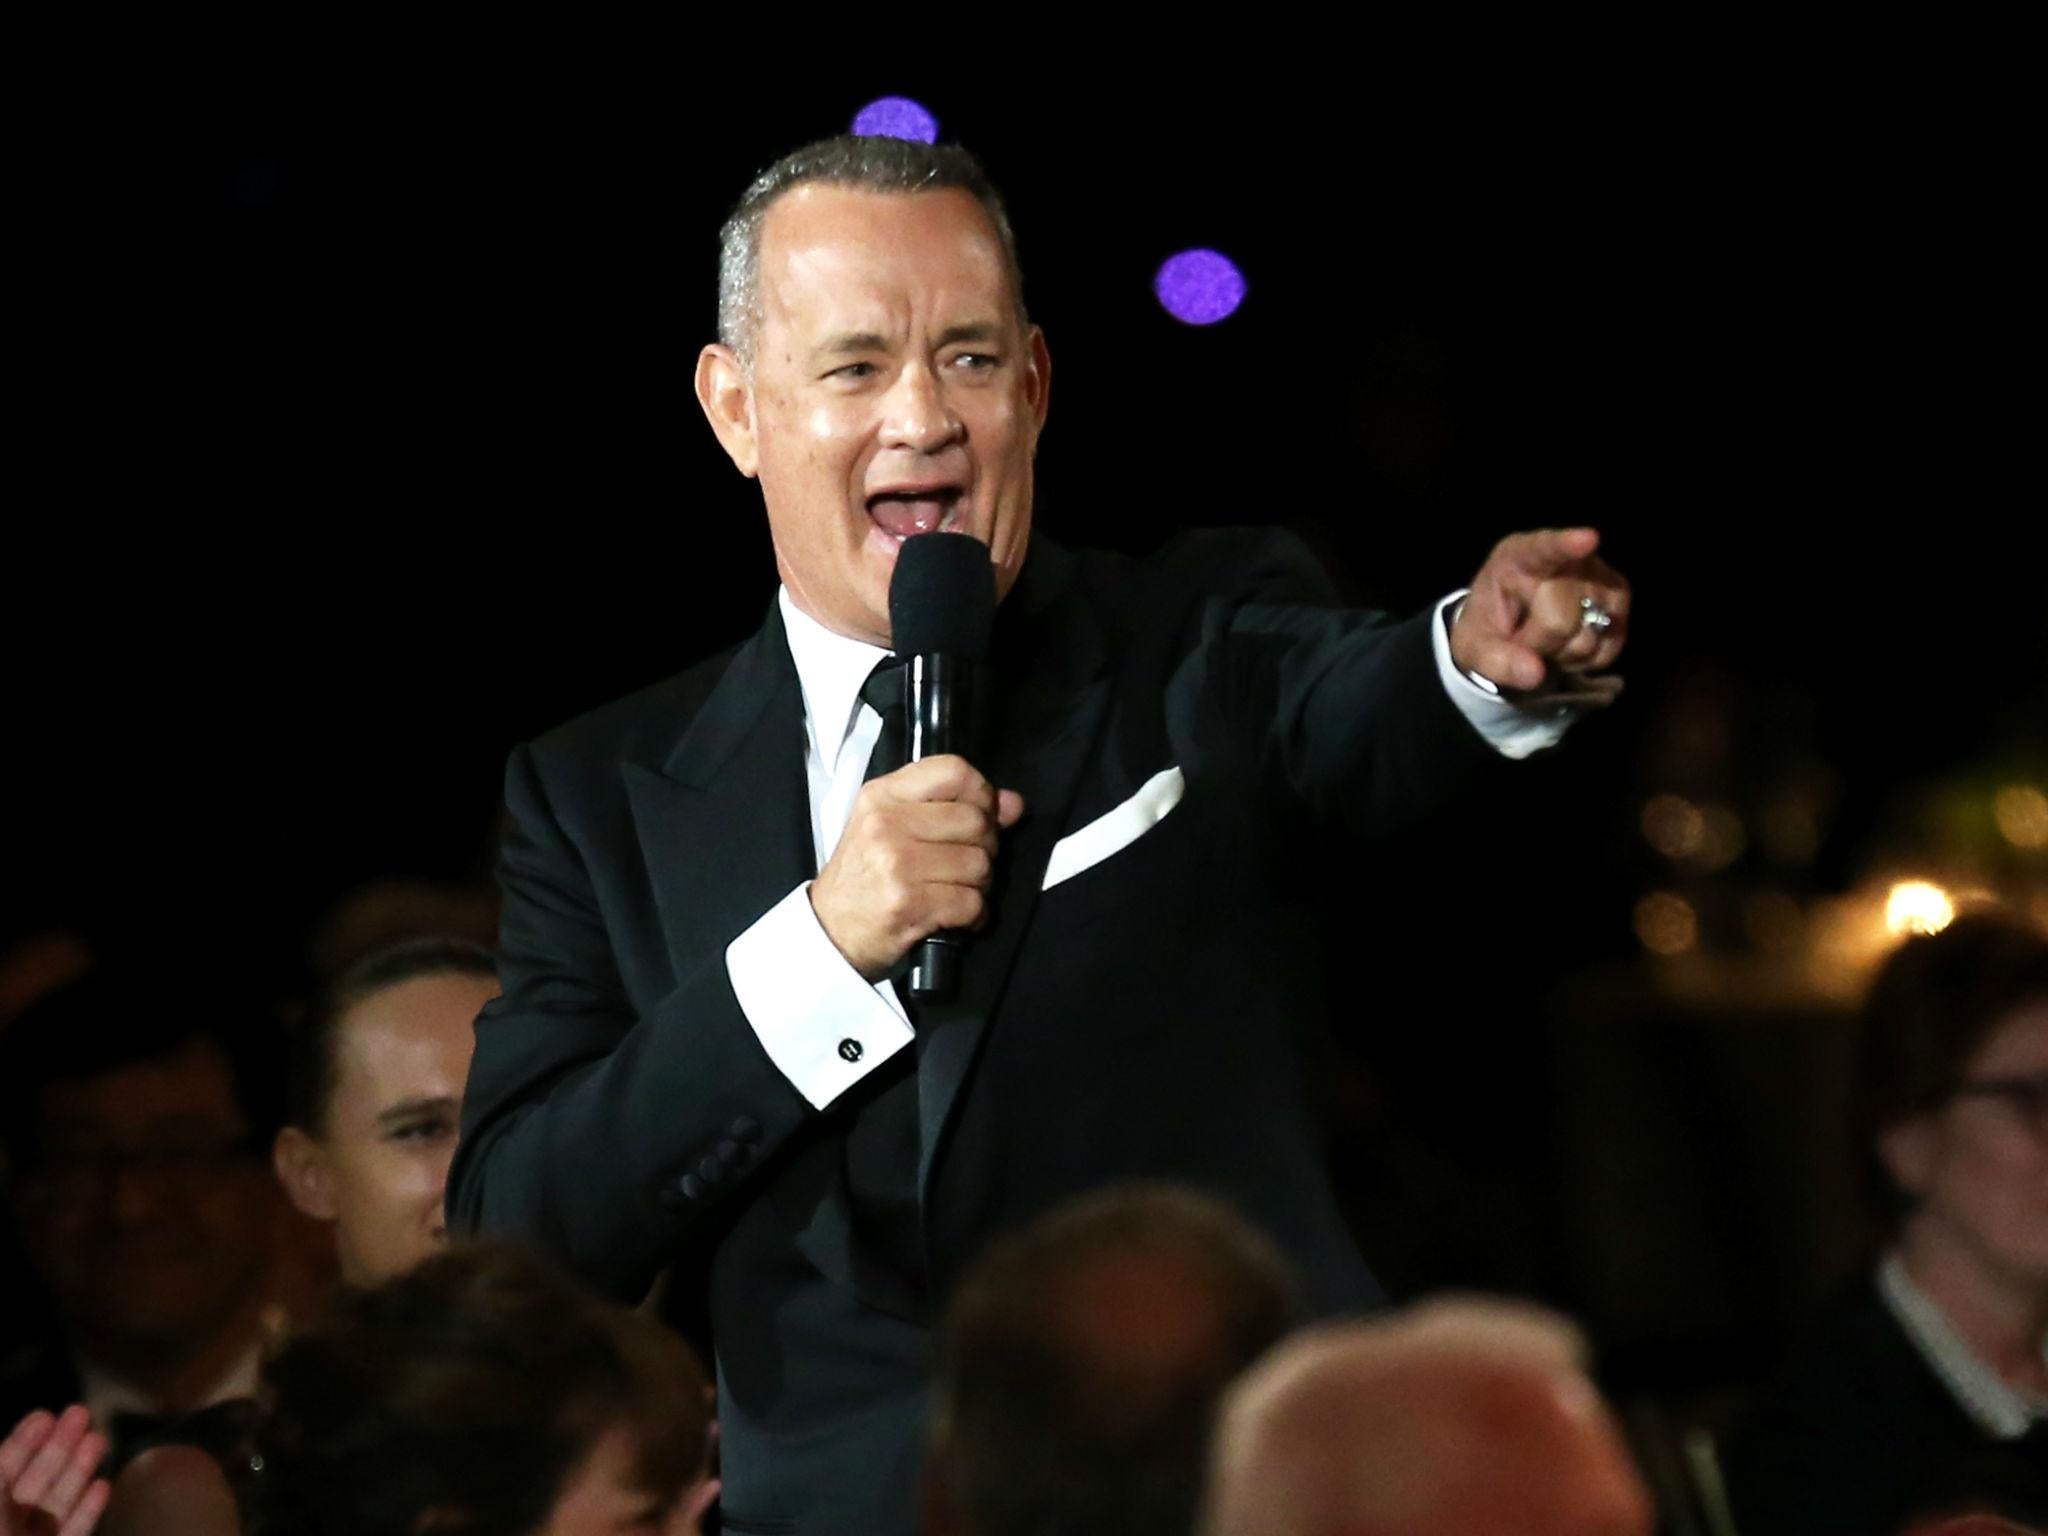 Tom Hanks has donated three coffee machines to the Presidential press pool since 2004